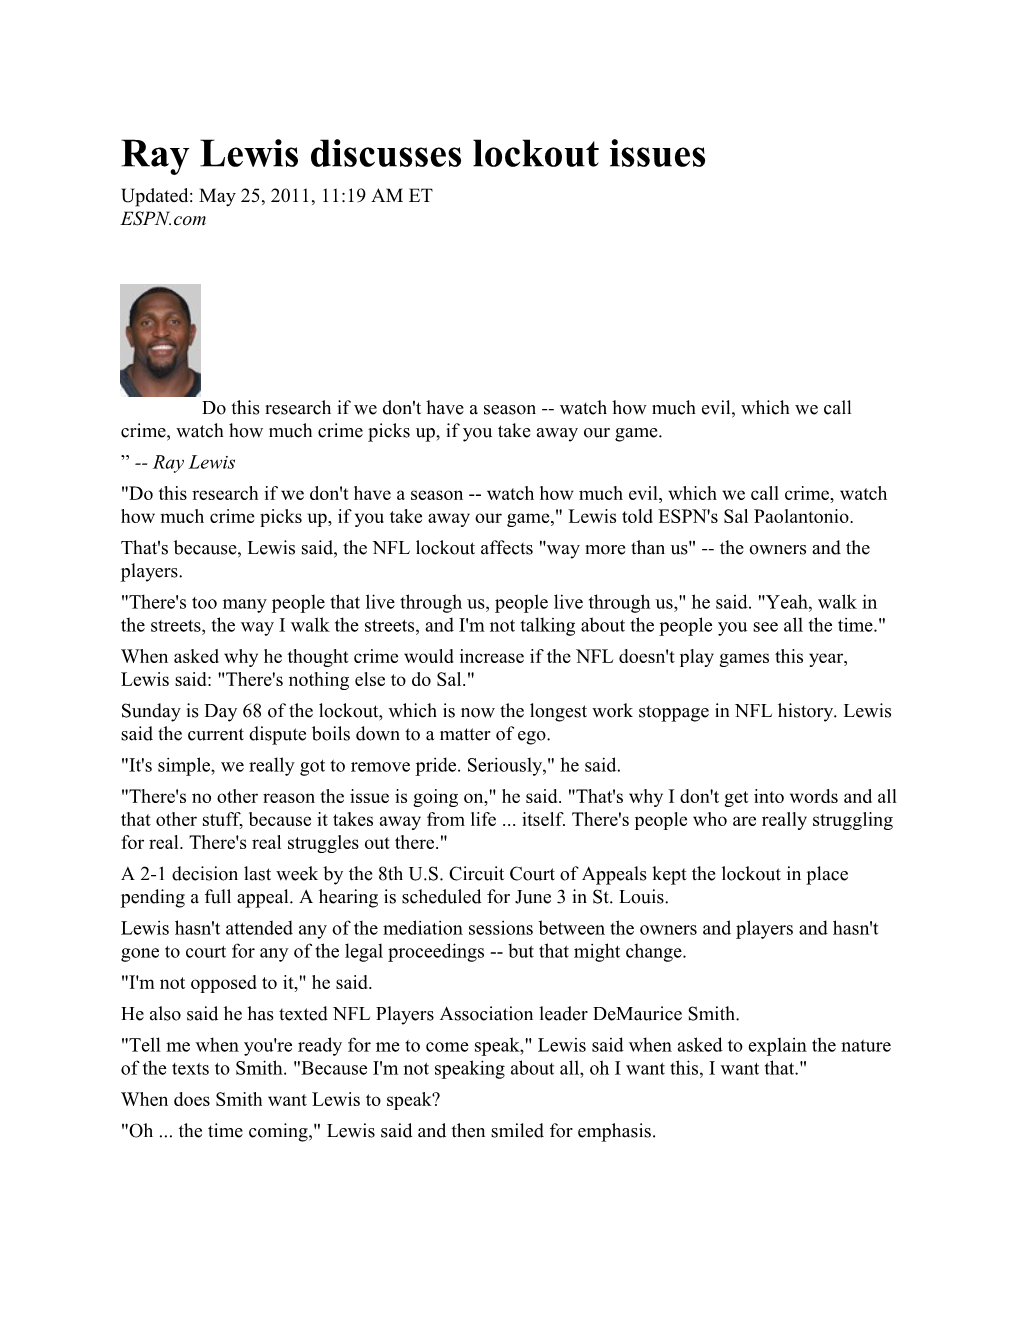 Ray Lewis Discusses Lockout Issues